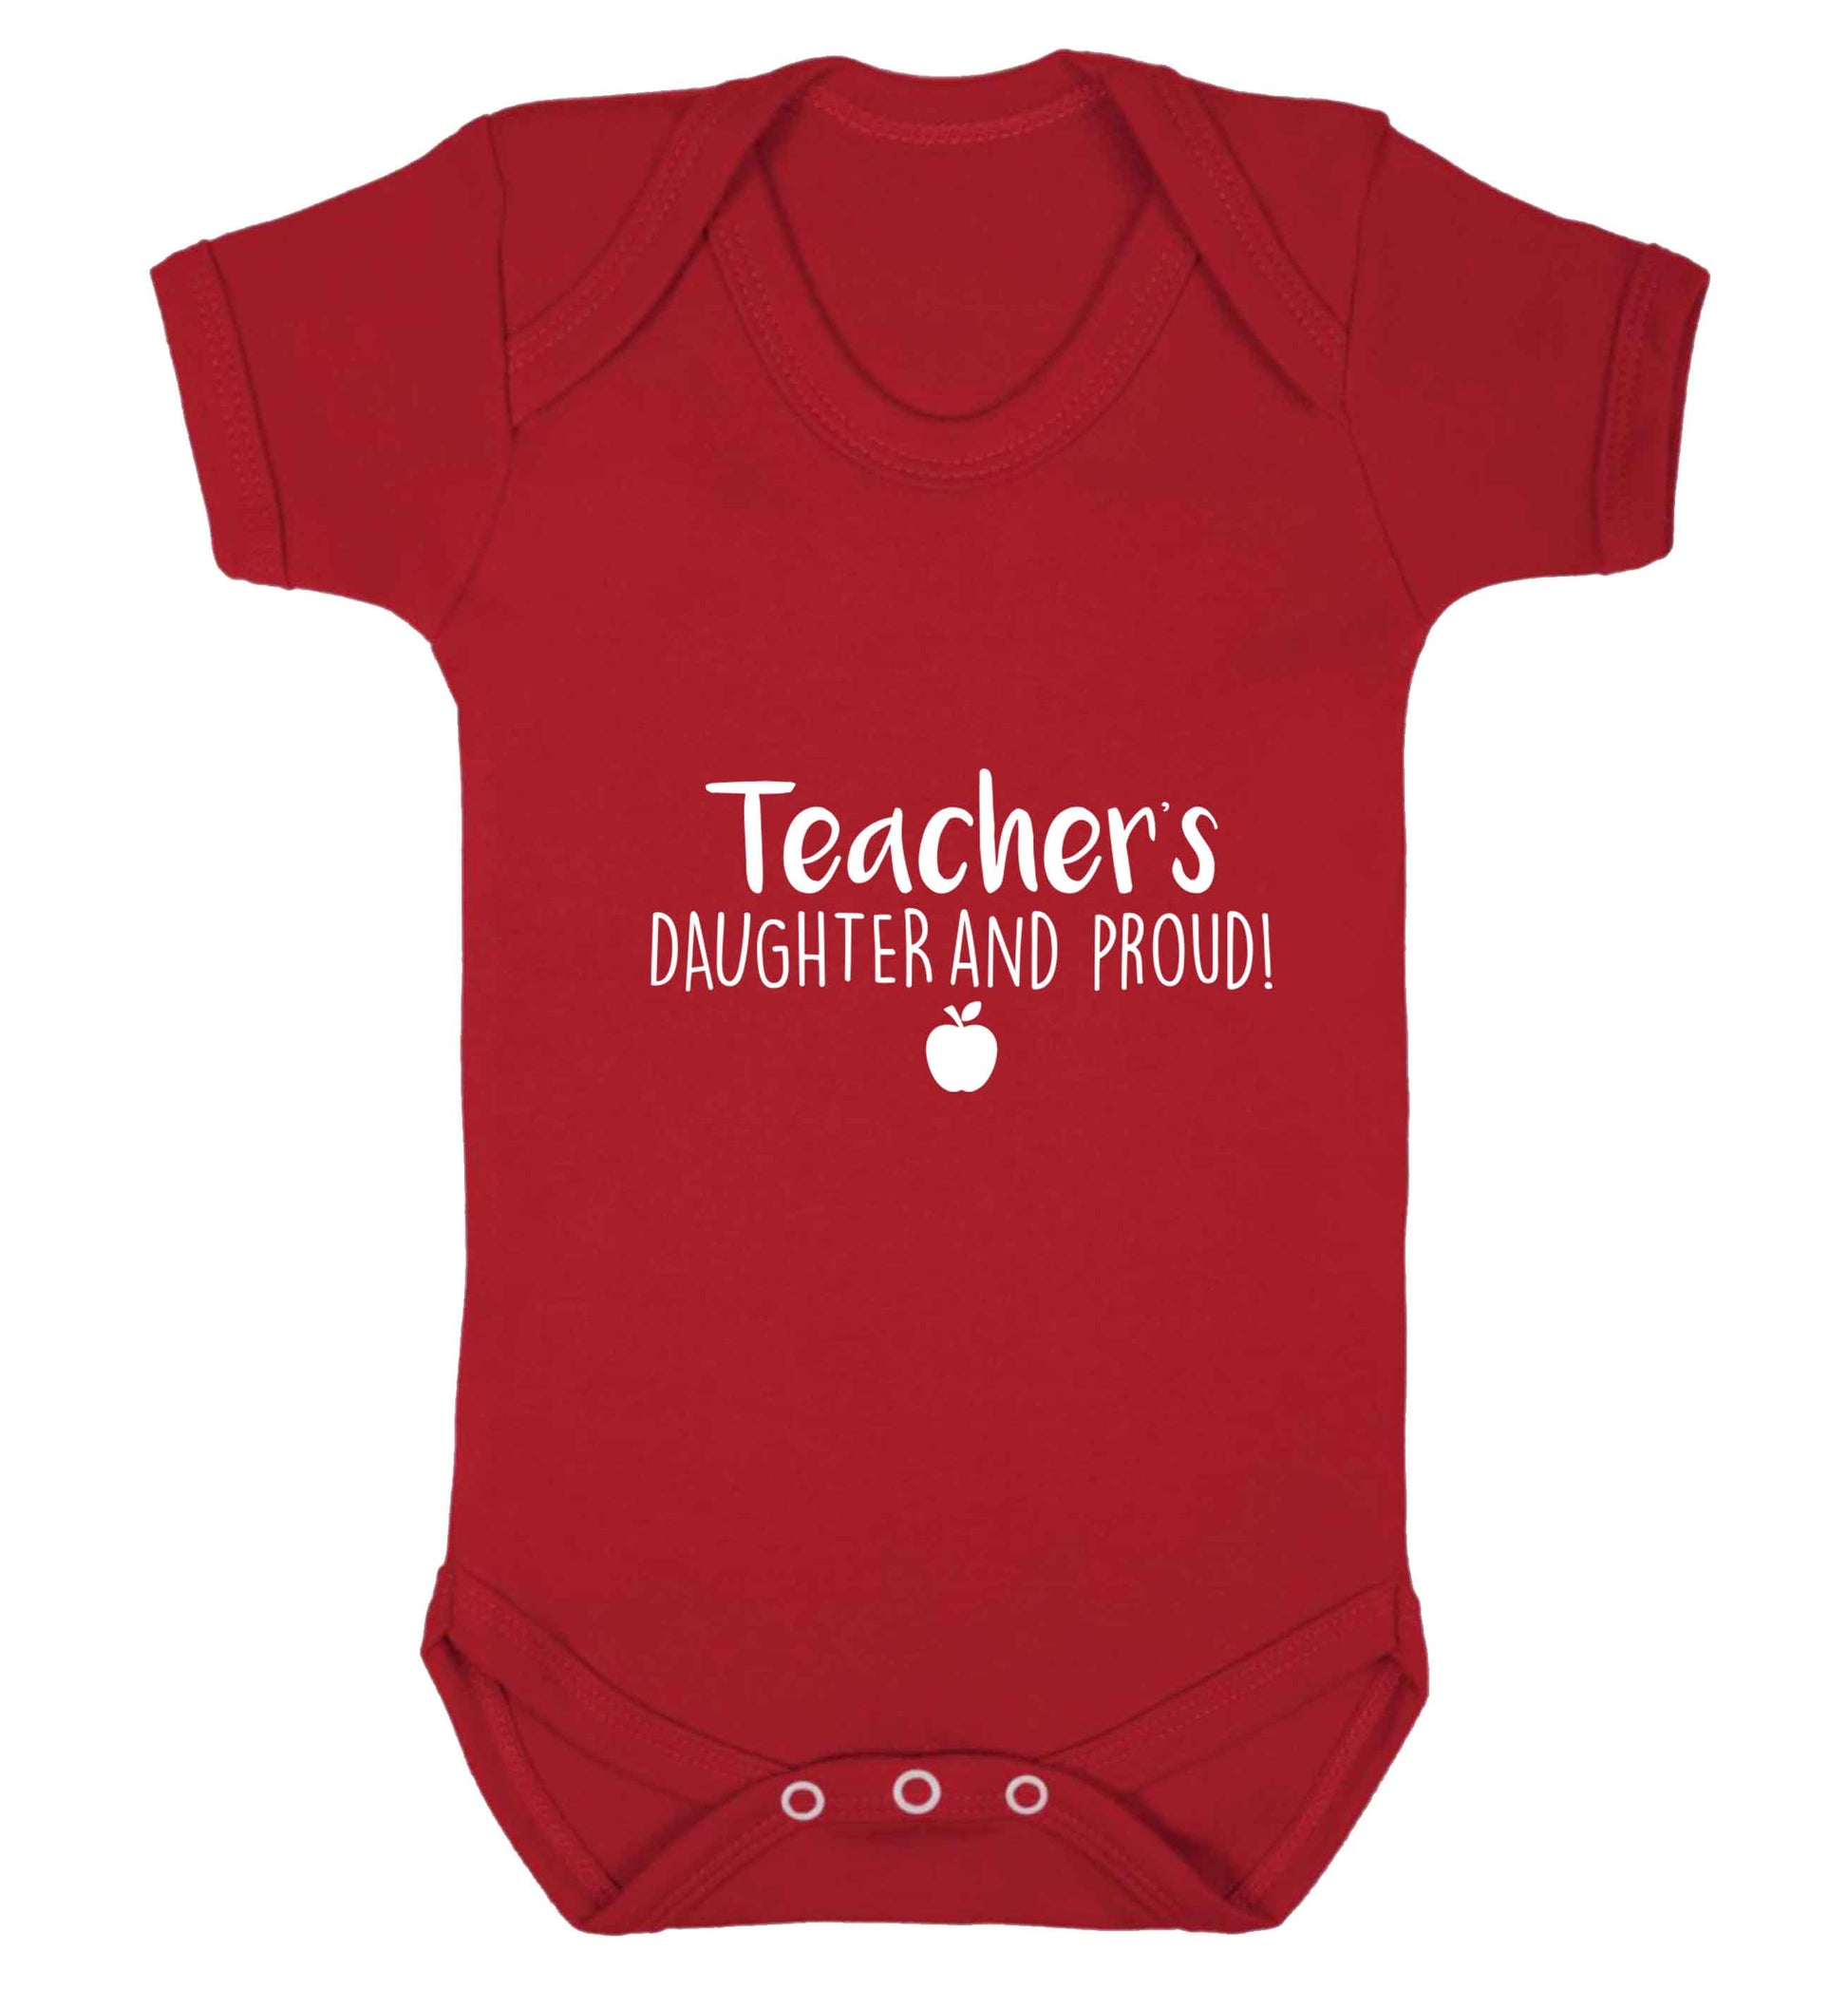 Teachers daughter and proud baby vest red 18-24 months